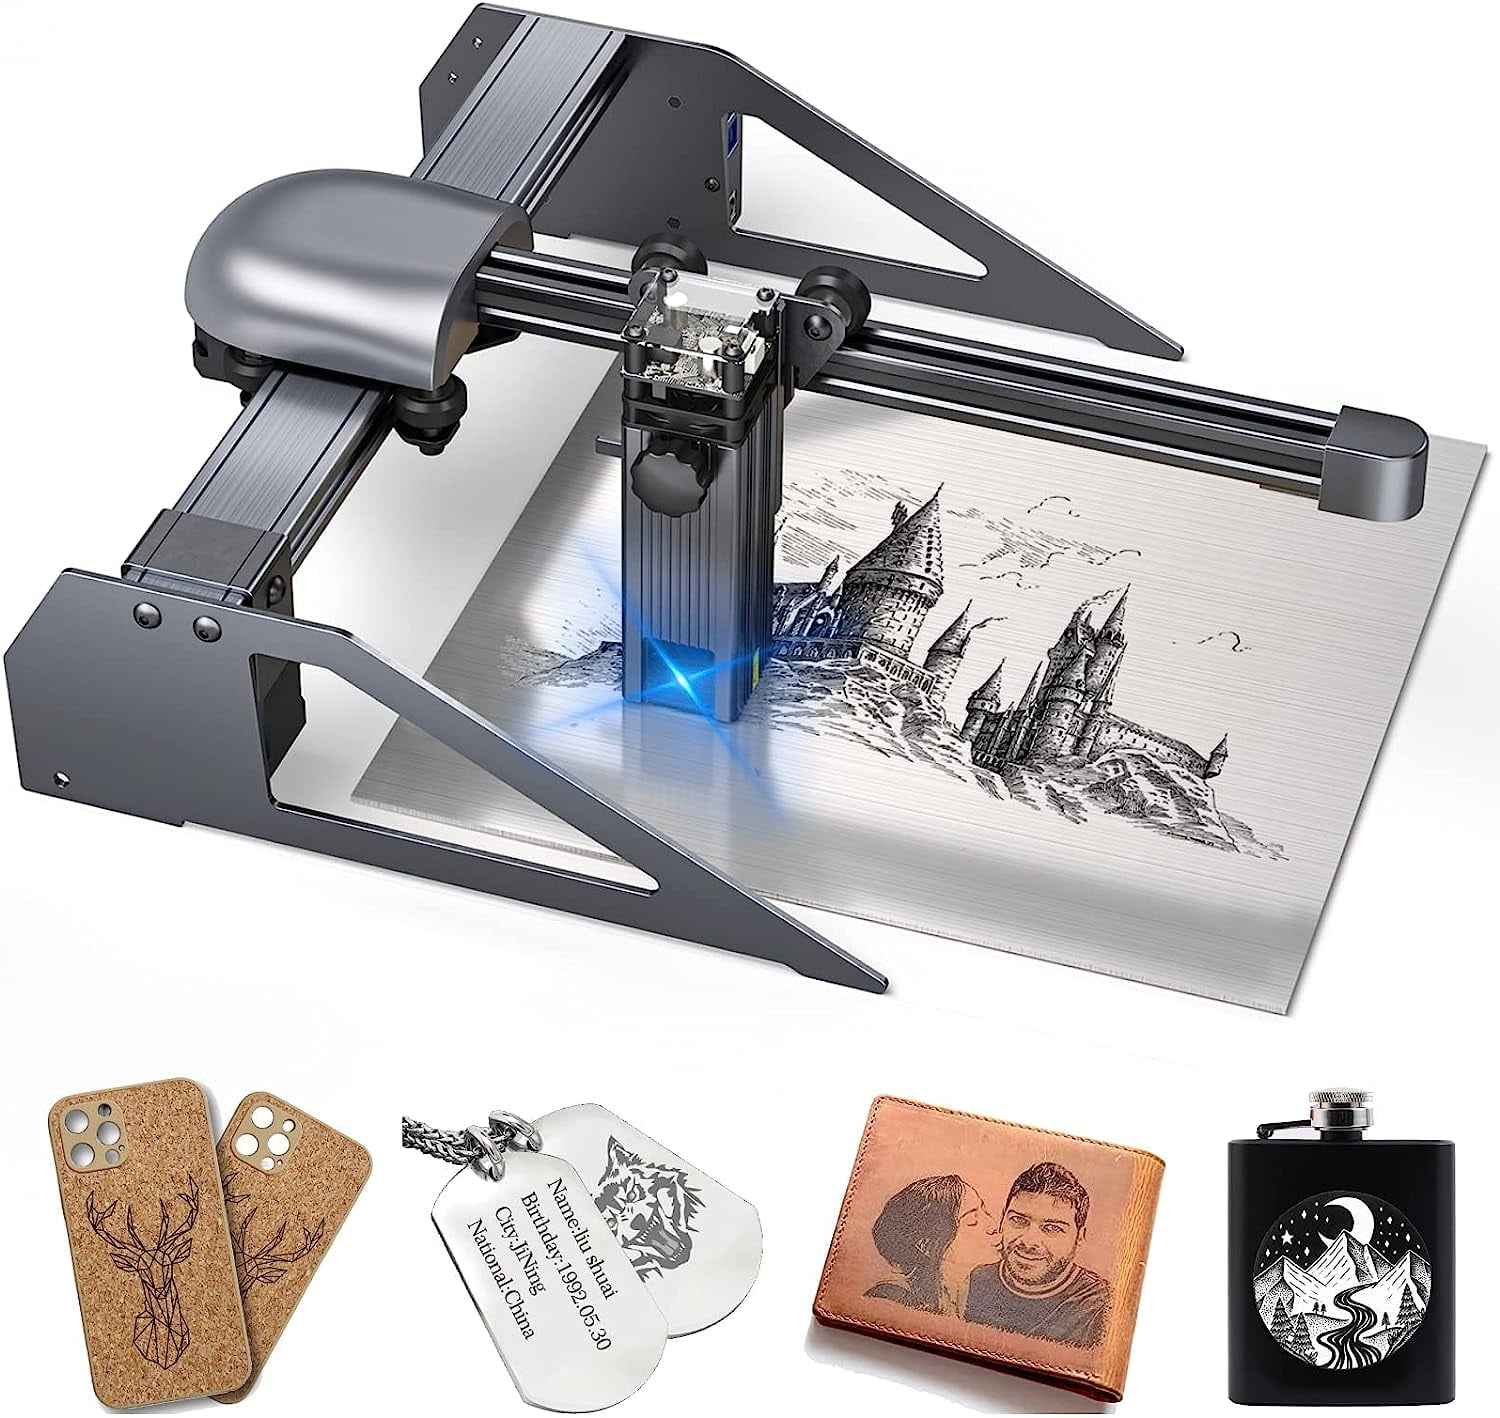 ATOMSTACK P7 M40 Laser Engraver Machine 200x200mm CNC Desktop Engraving  Metal Stainless Steel Cutting Wood Acrylic Easy Install - AliExpress